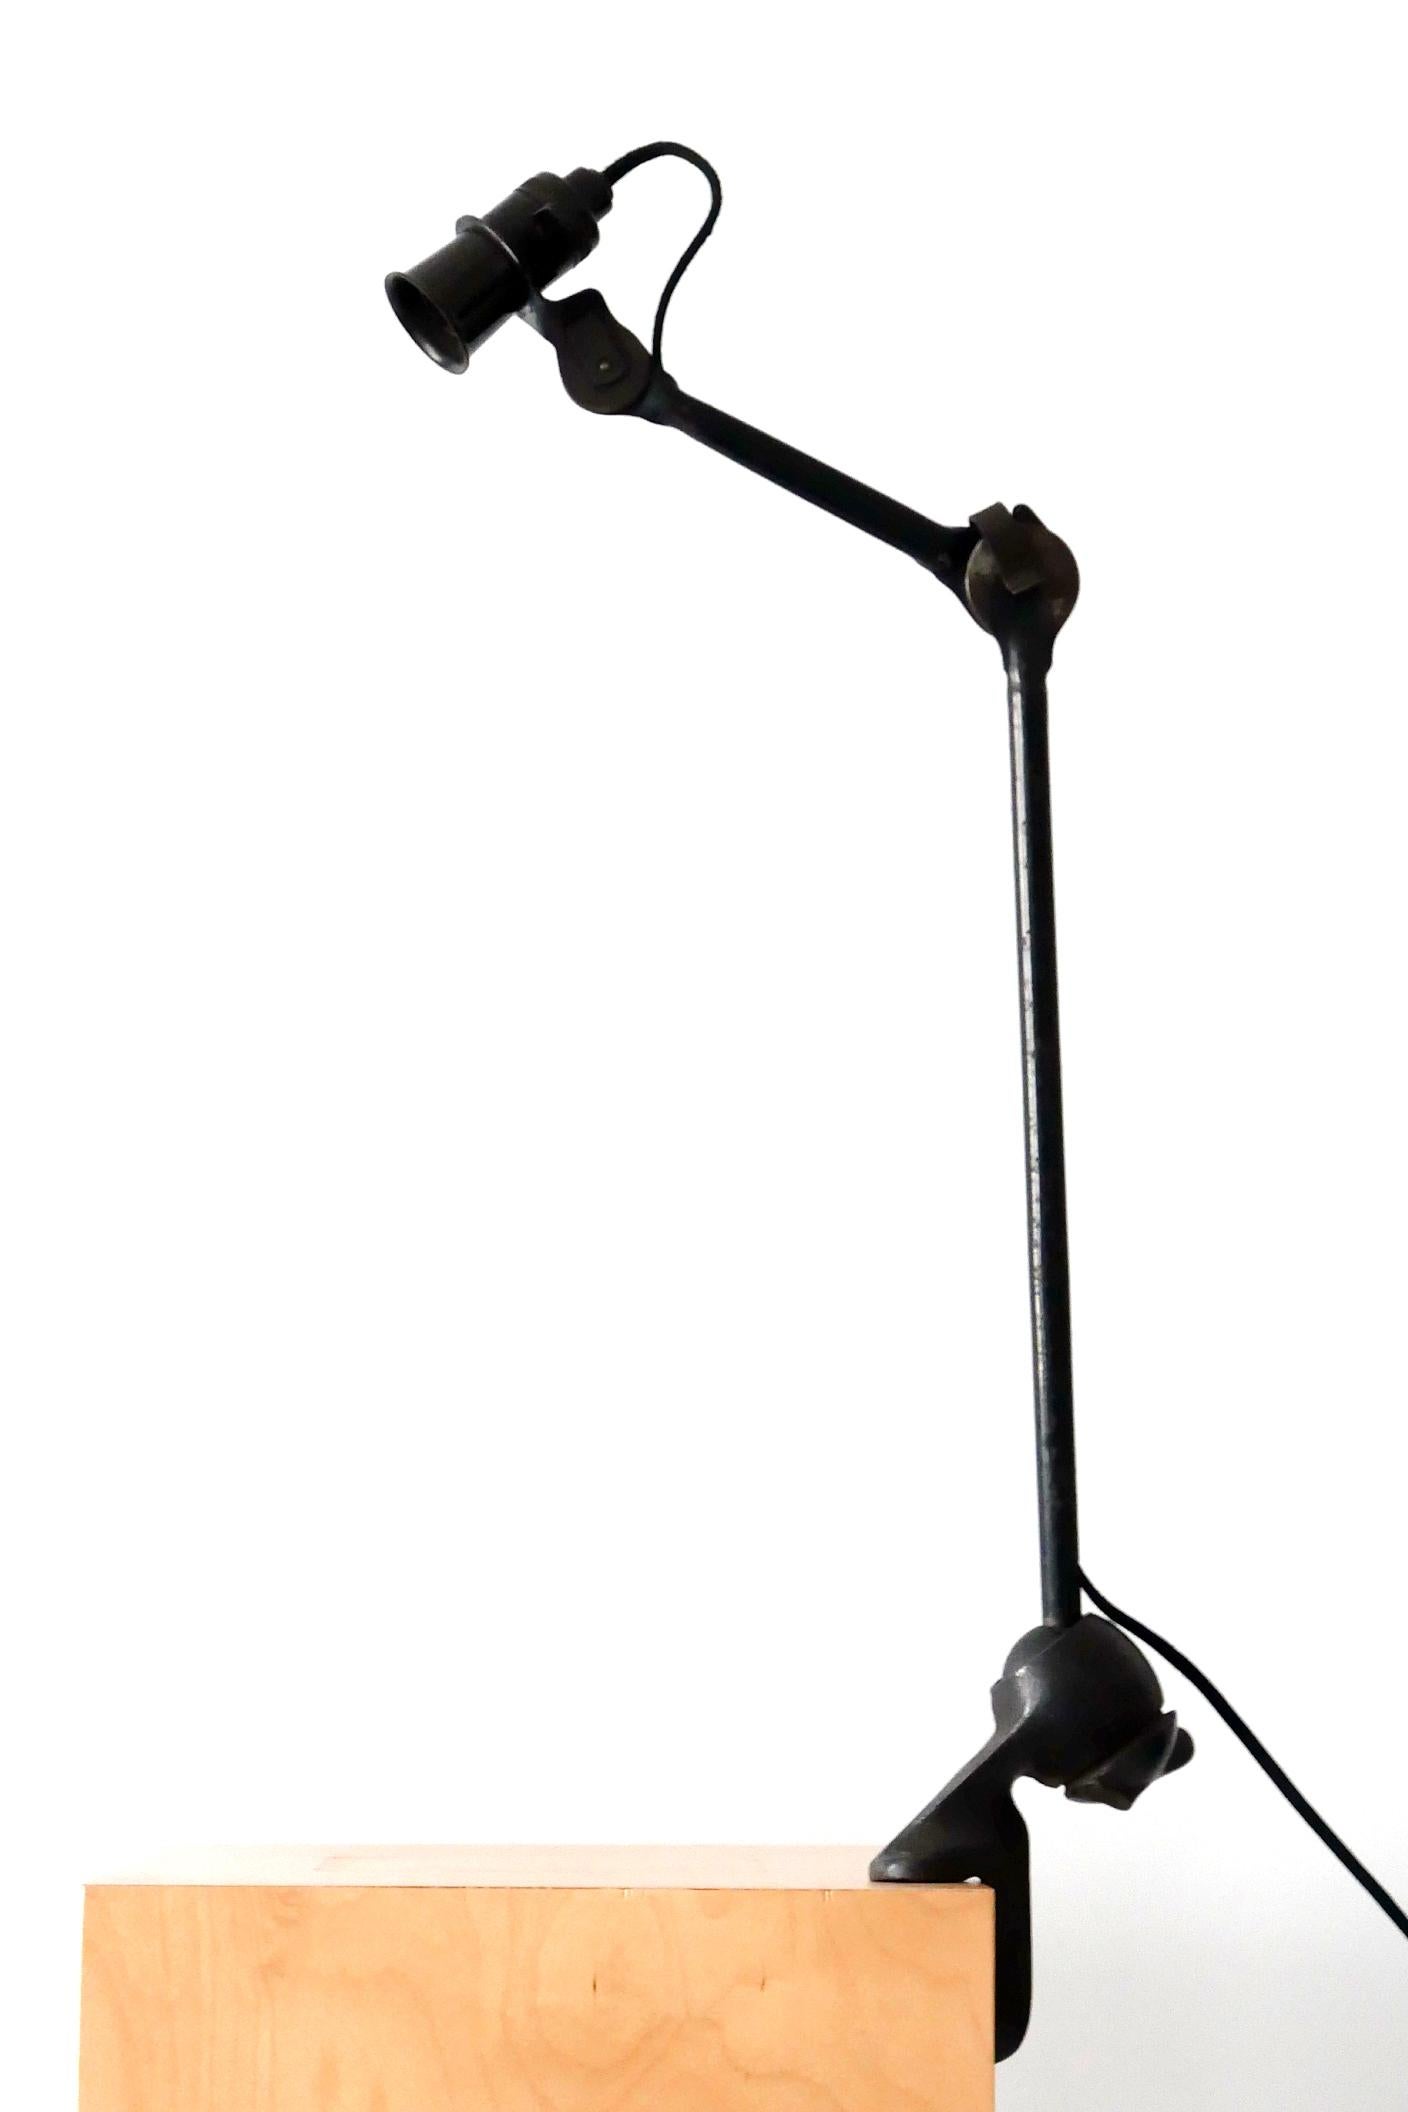 Modernist Task Light or Clamp Table Lamp by Bernard-Albin Gras for Gras, 1920s In Good Condition For Sale In Munich, DE